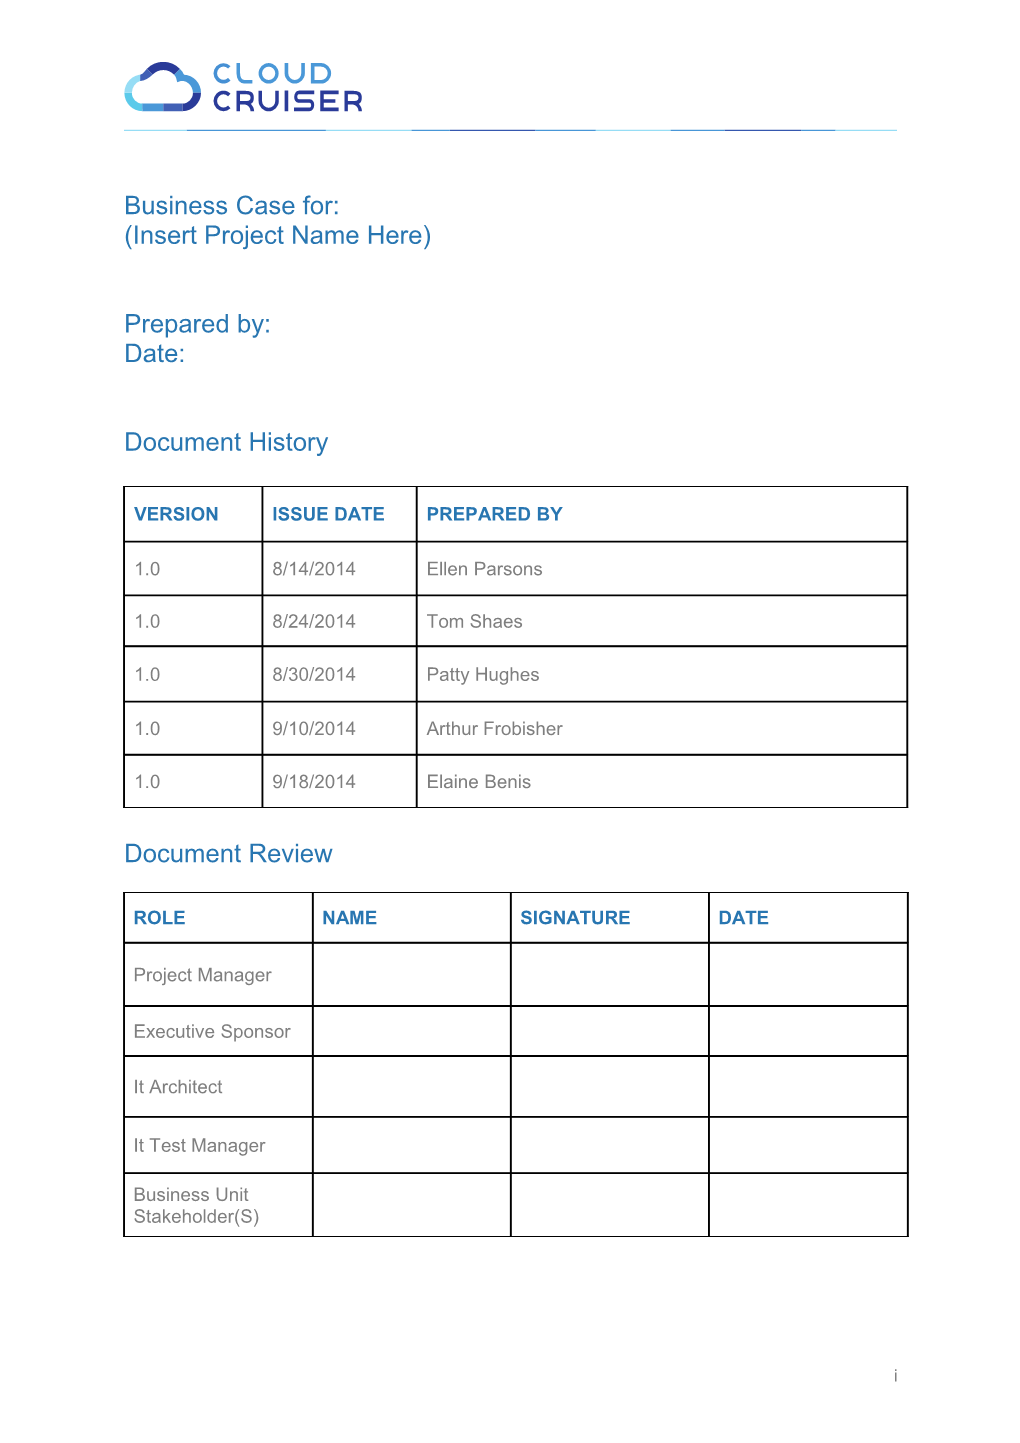 Business Case Template s2